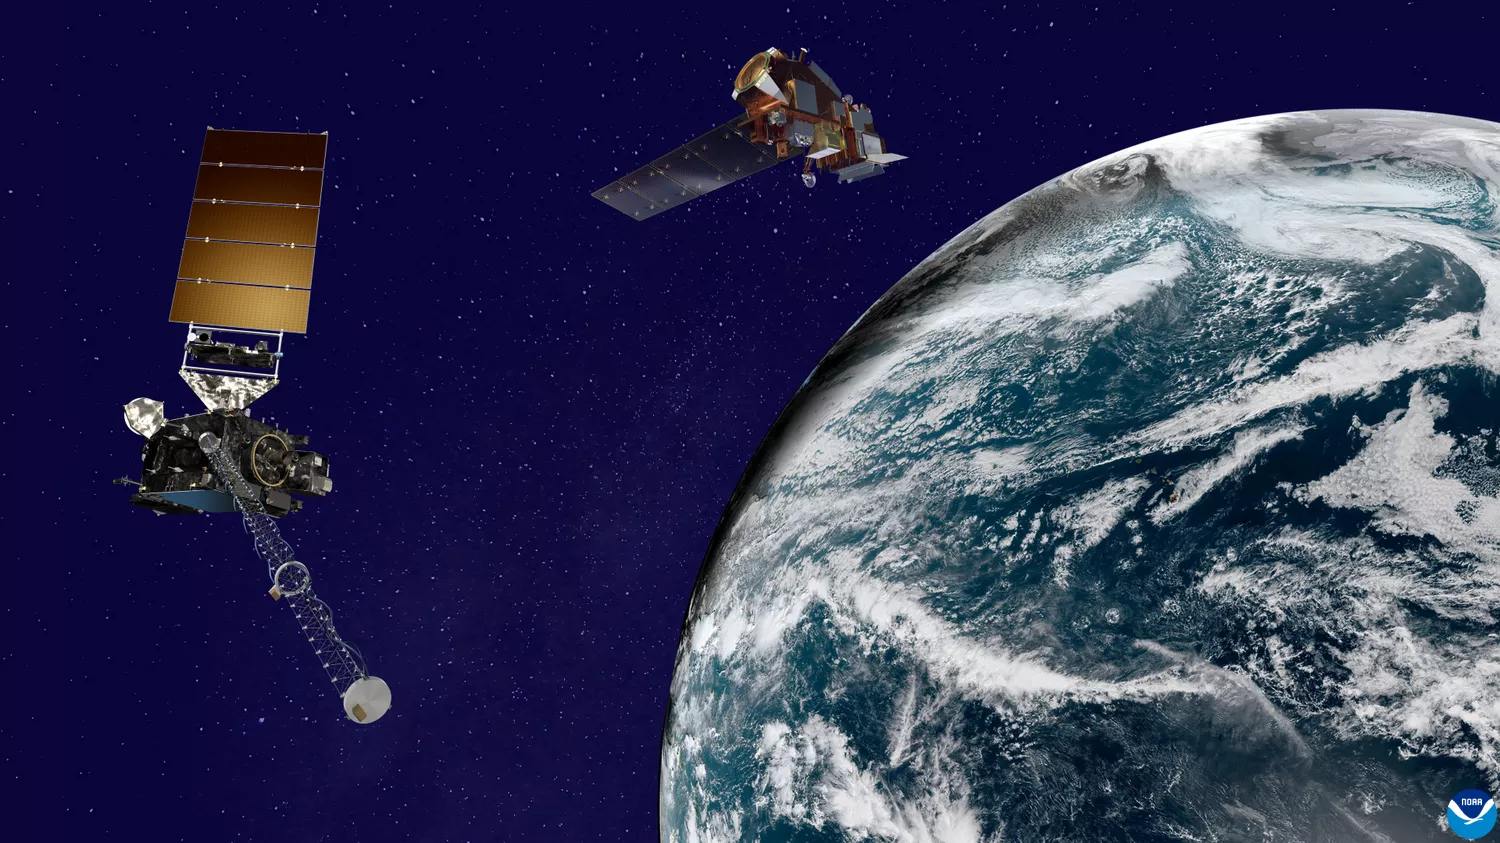 Image of the GOES and JPSS satellites orbiting the earth